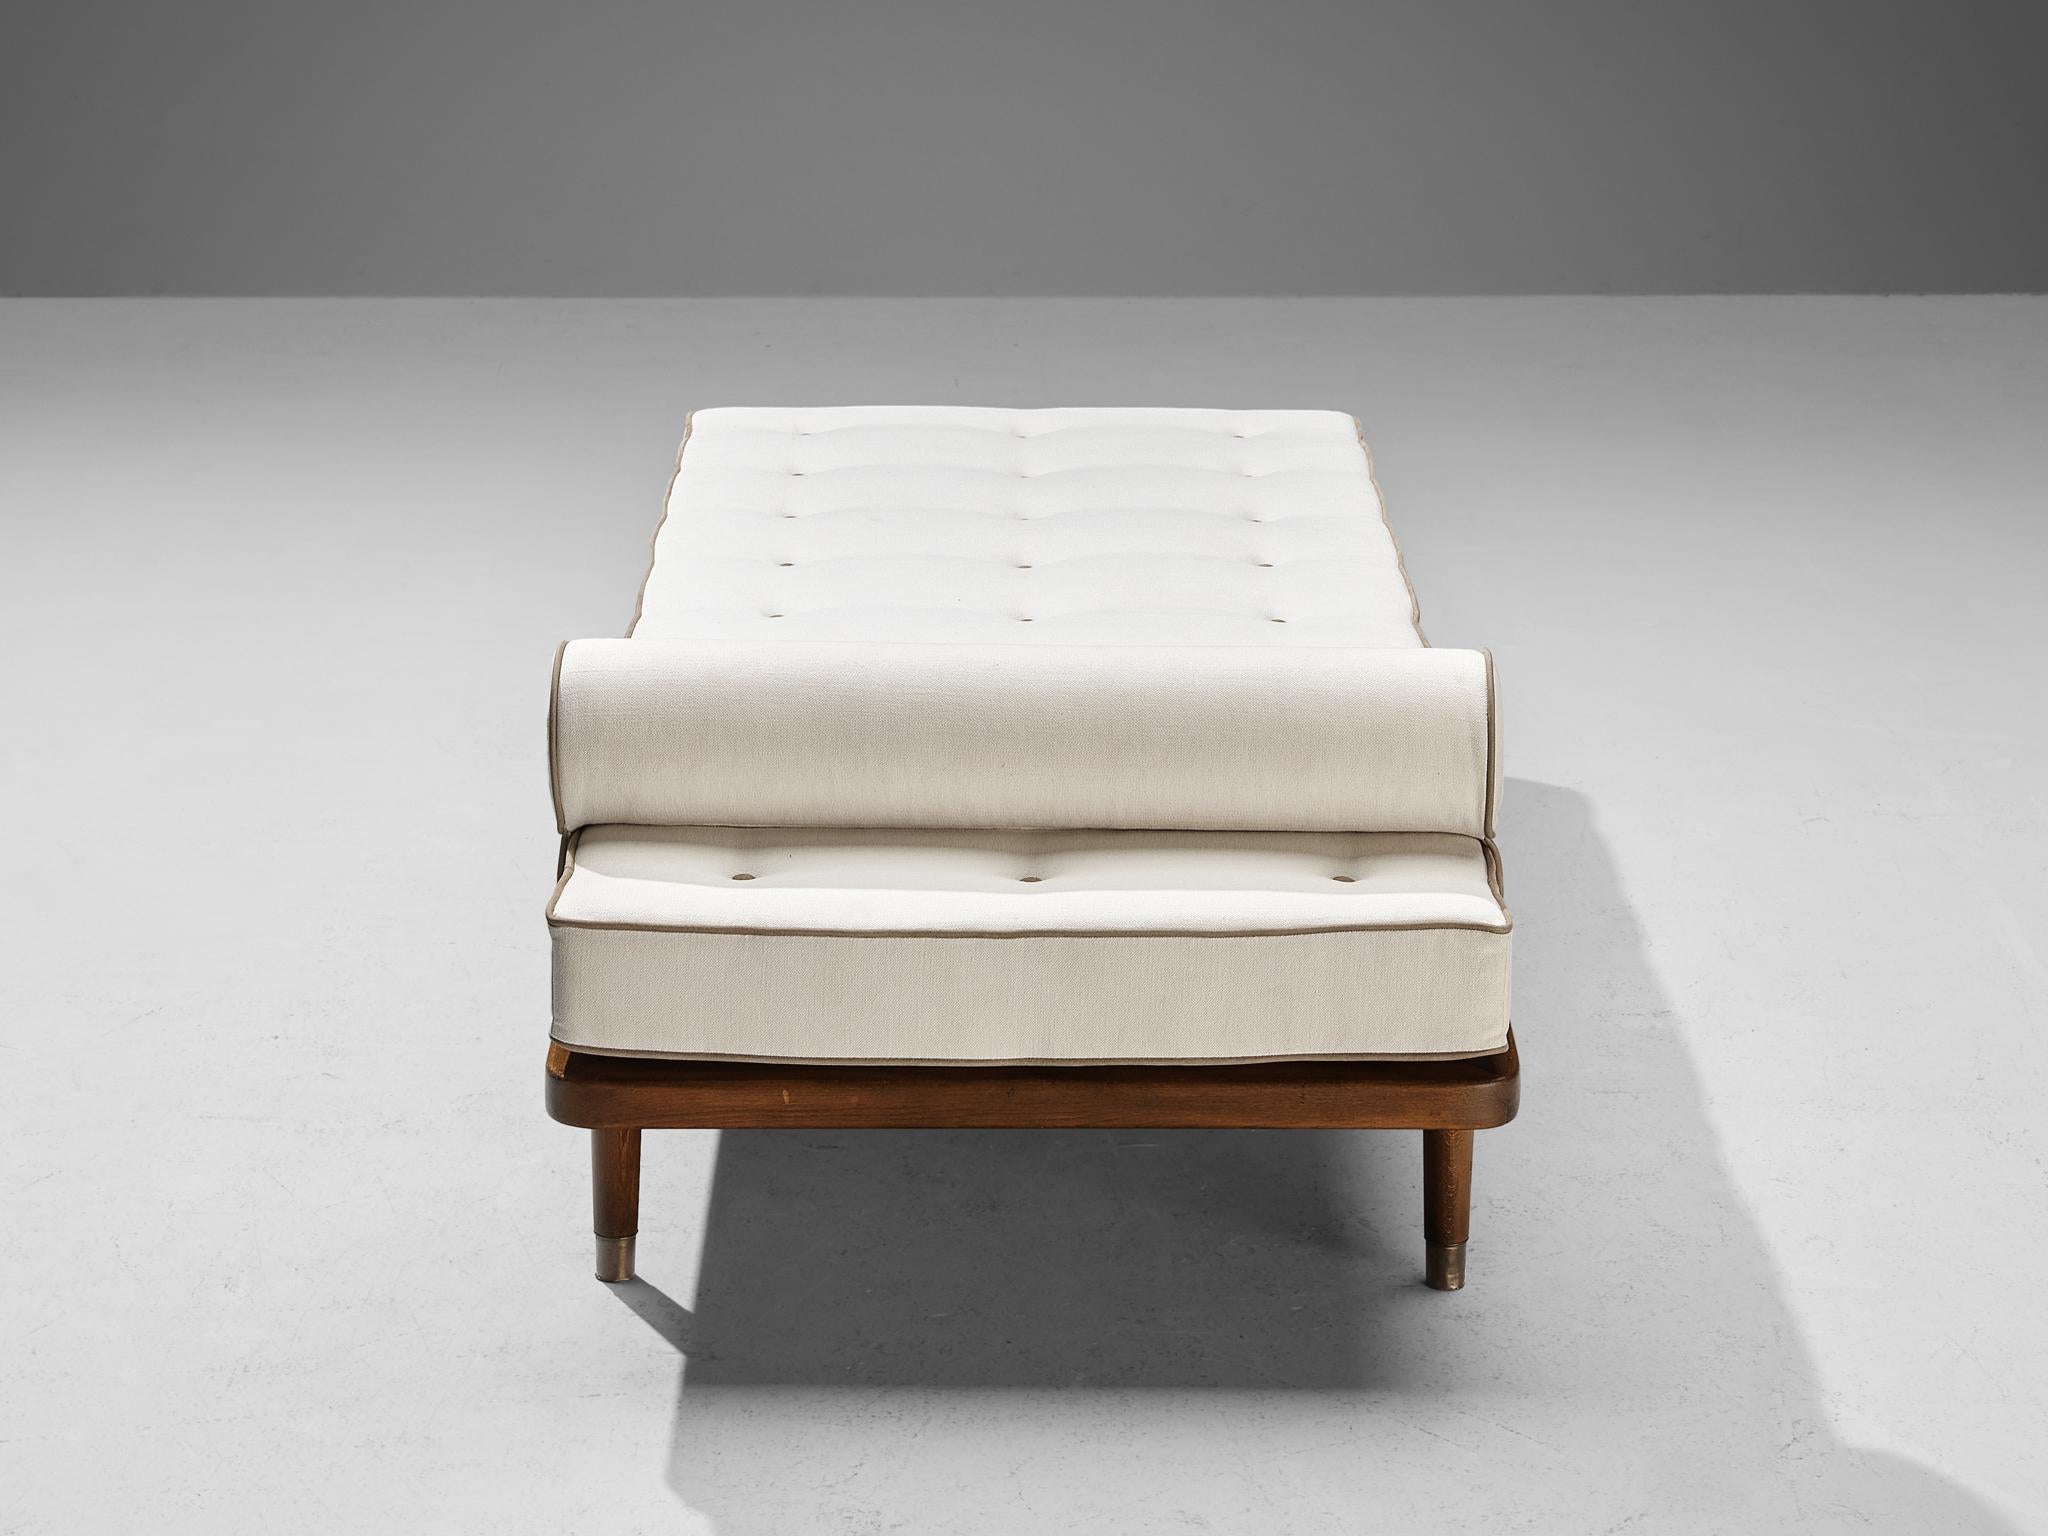 Daybed, beech, brass, Denmark, 1950s

A simple and minimalist bed designed in line with the Scandinavian Modern Design principles. With its clean and uncluttered look, the wooden framework takes center stage. It is based on clear lines with subtle